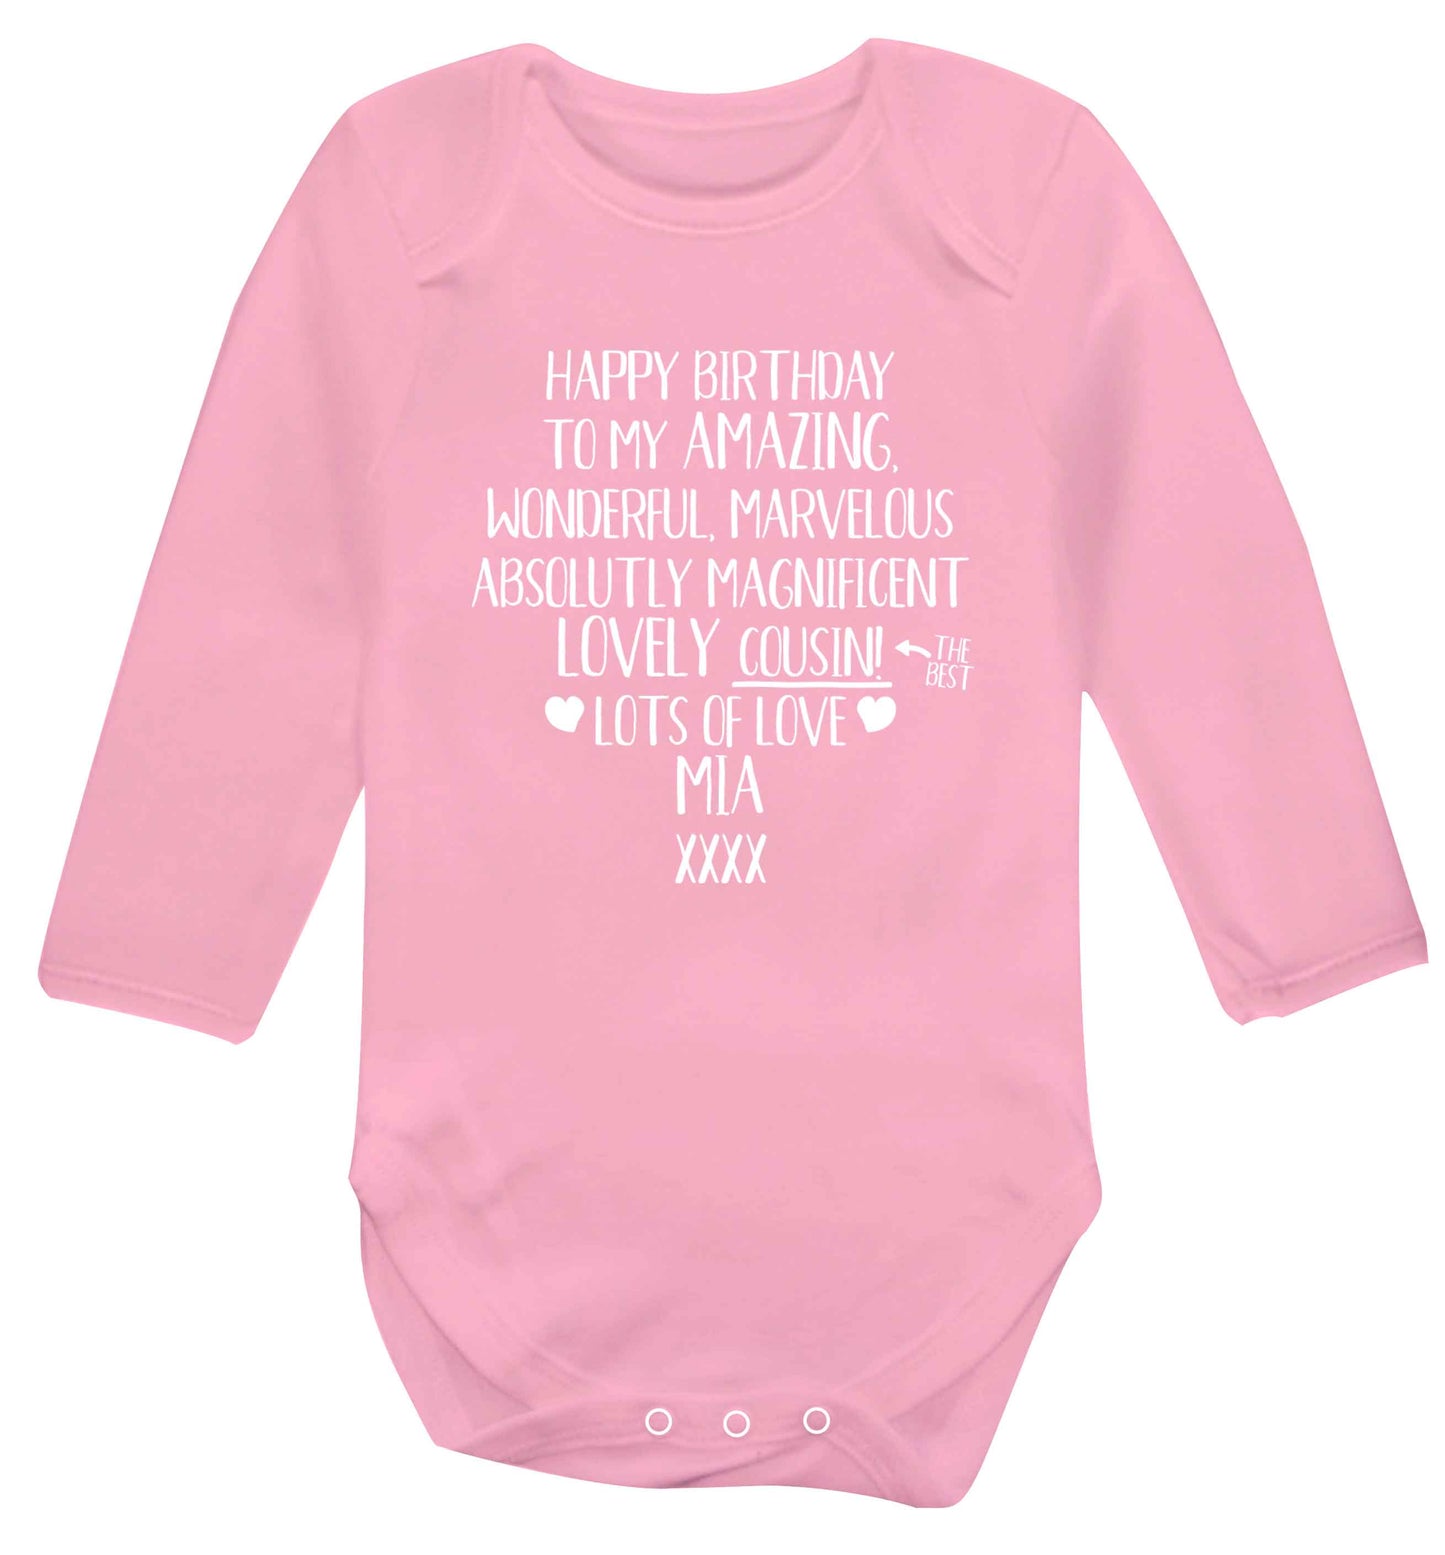 Personalised happy birthday to my amazing, wonderful, lovely cousin Baby Vest long sleeved pale pink 6-12 months